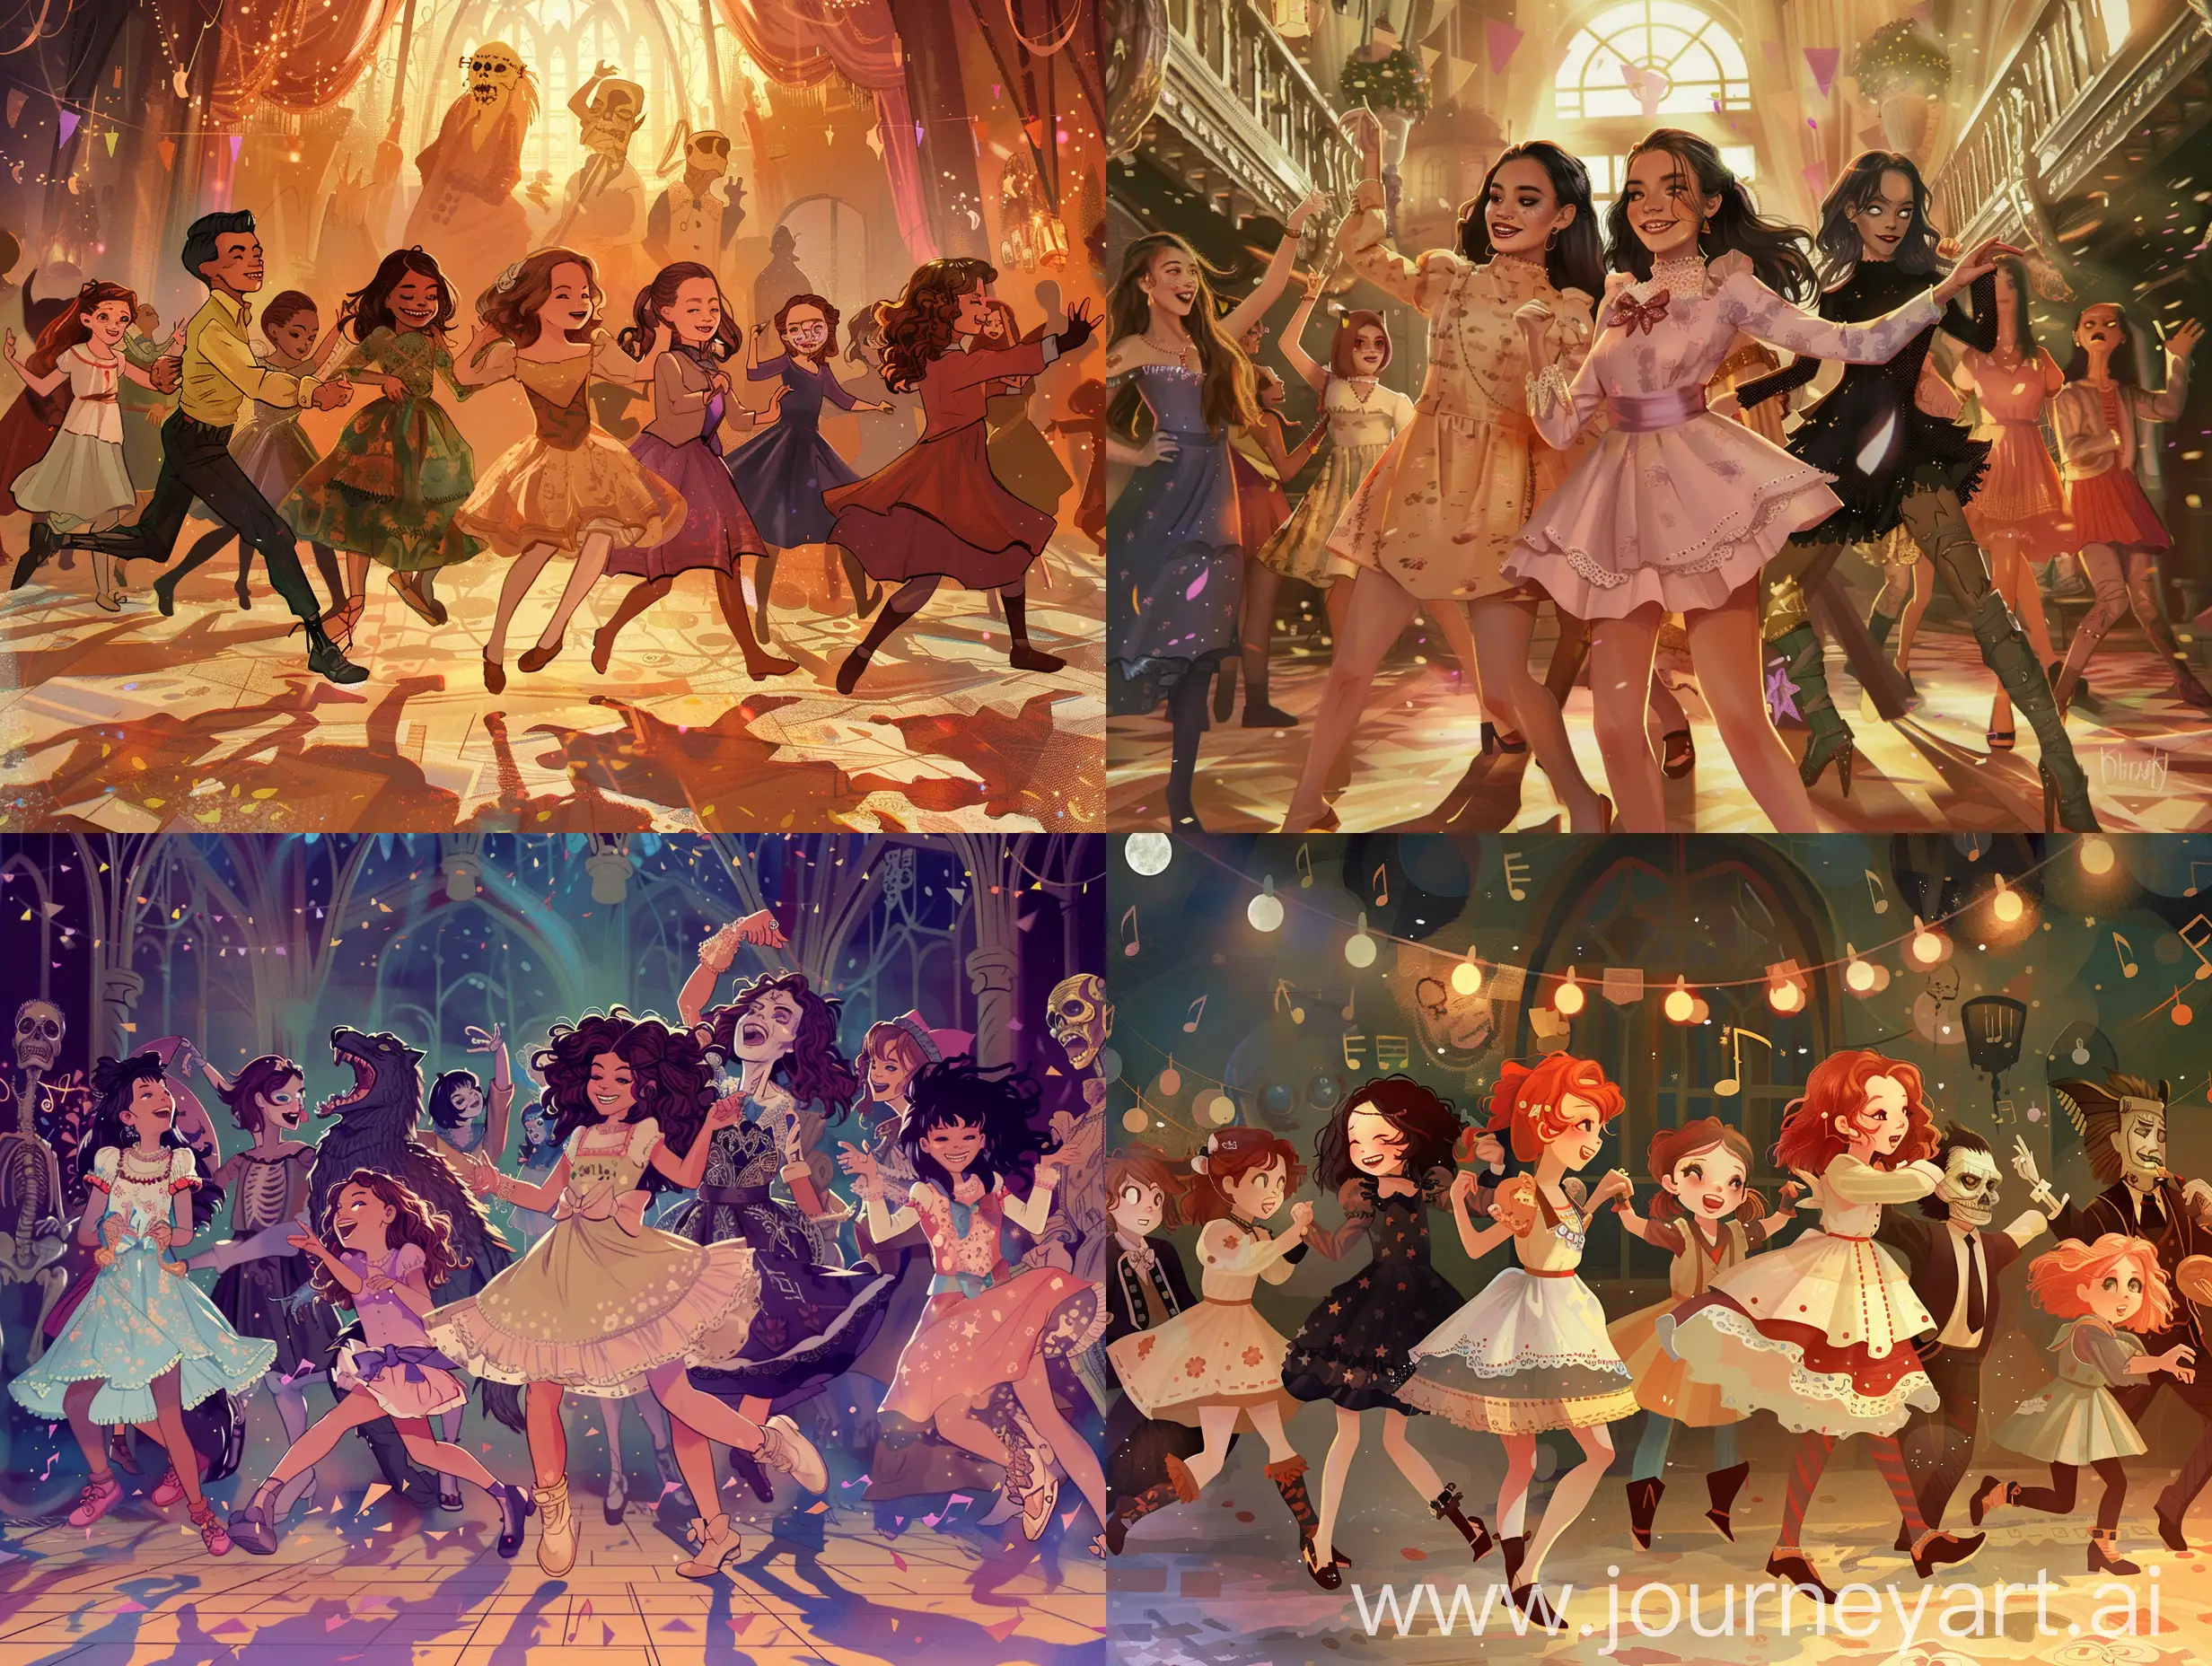 Whimsical-Porcelain-Doll-Style-Dance-Party-with-Mythical-Creatures